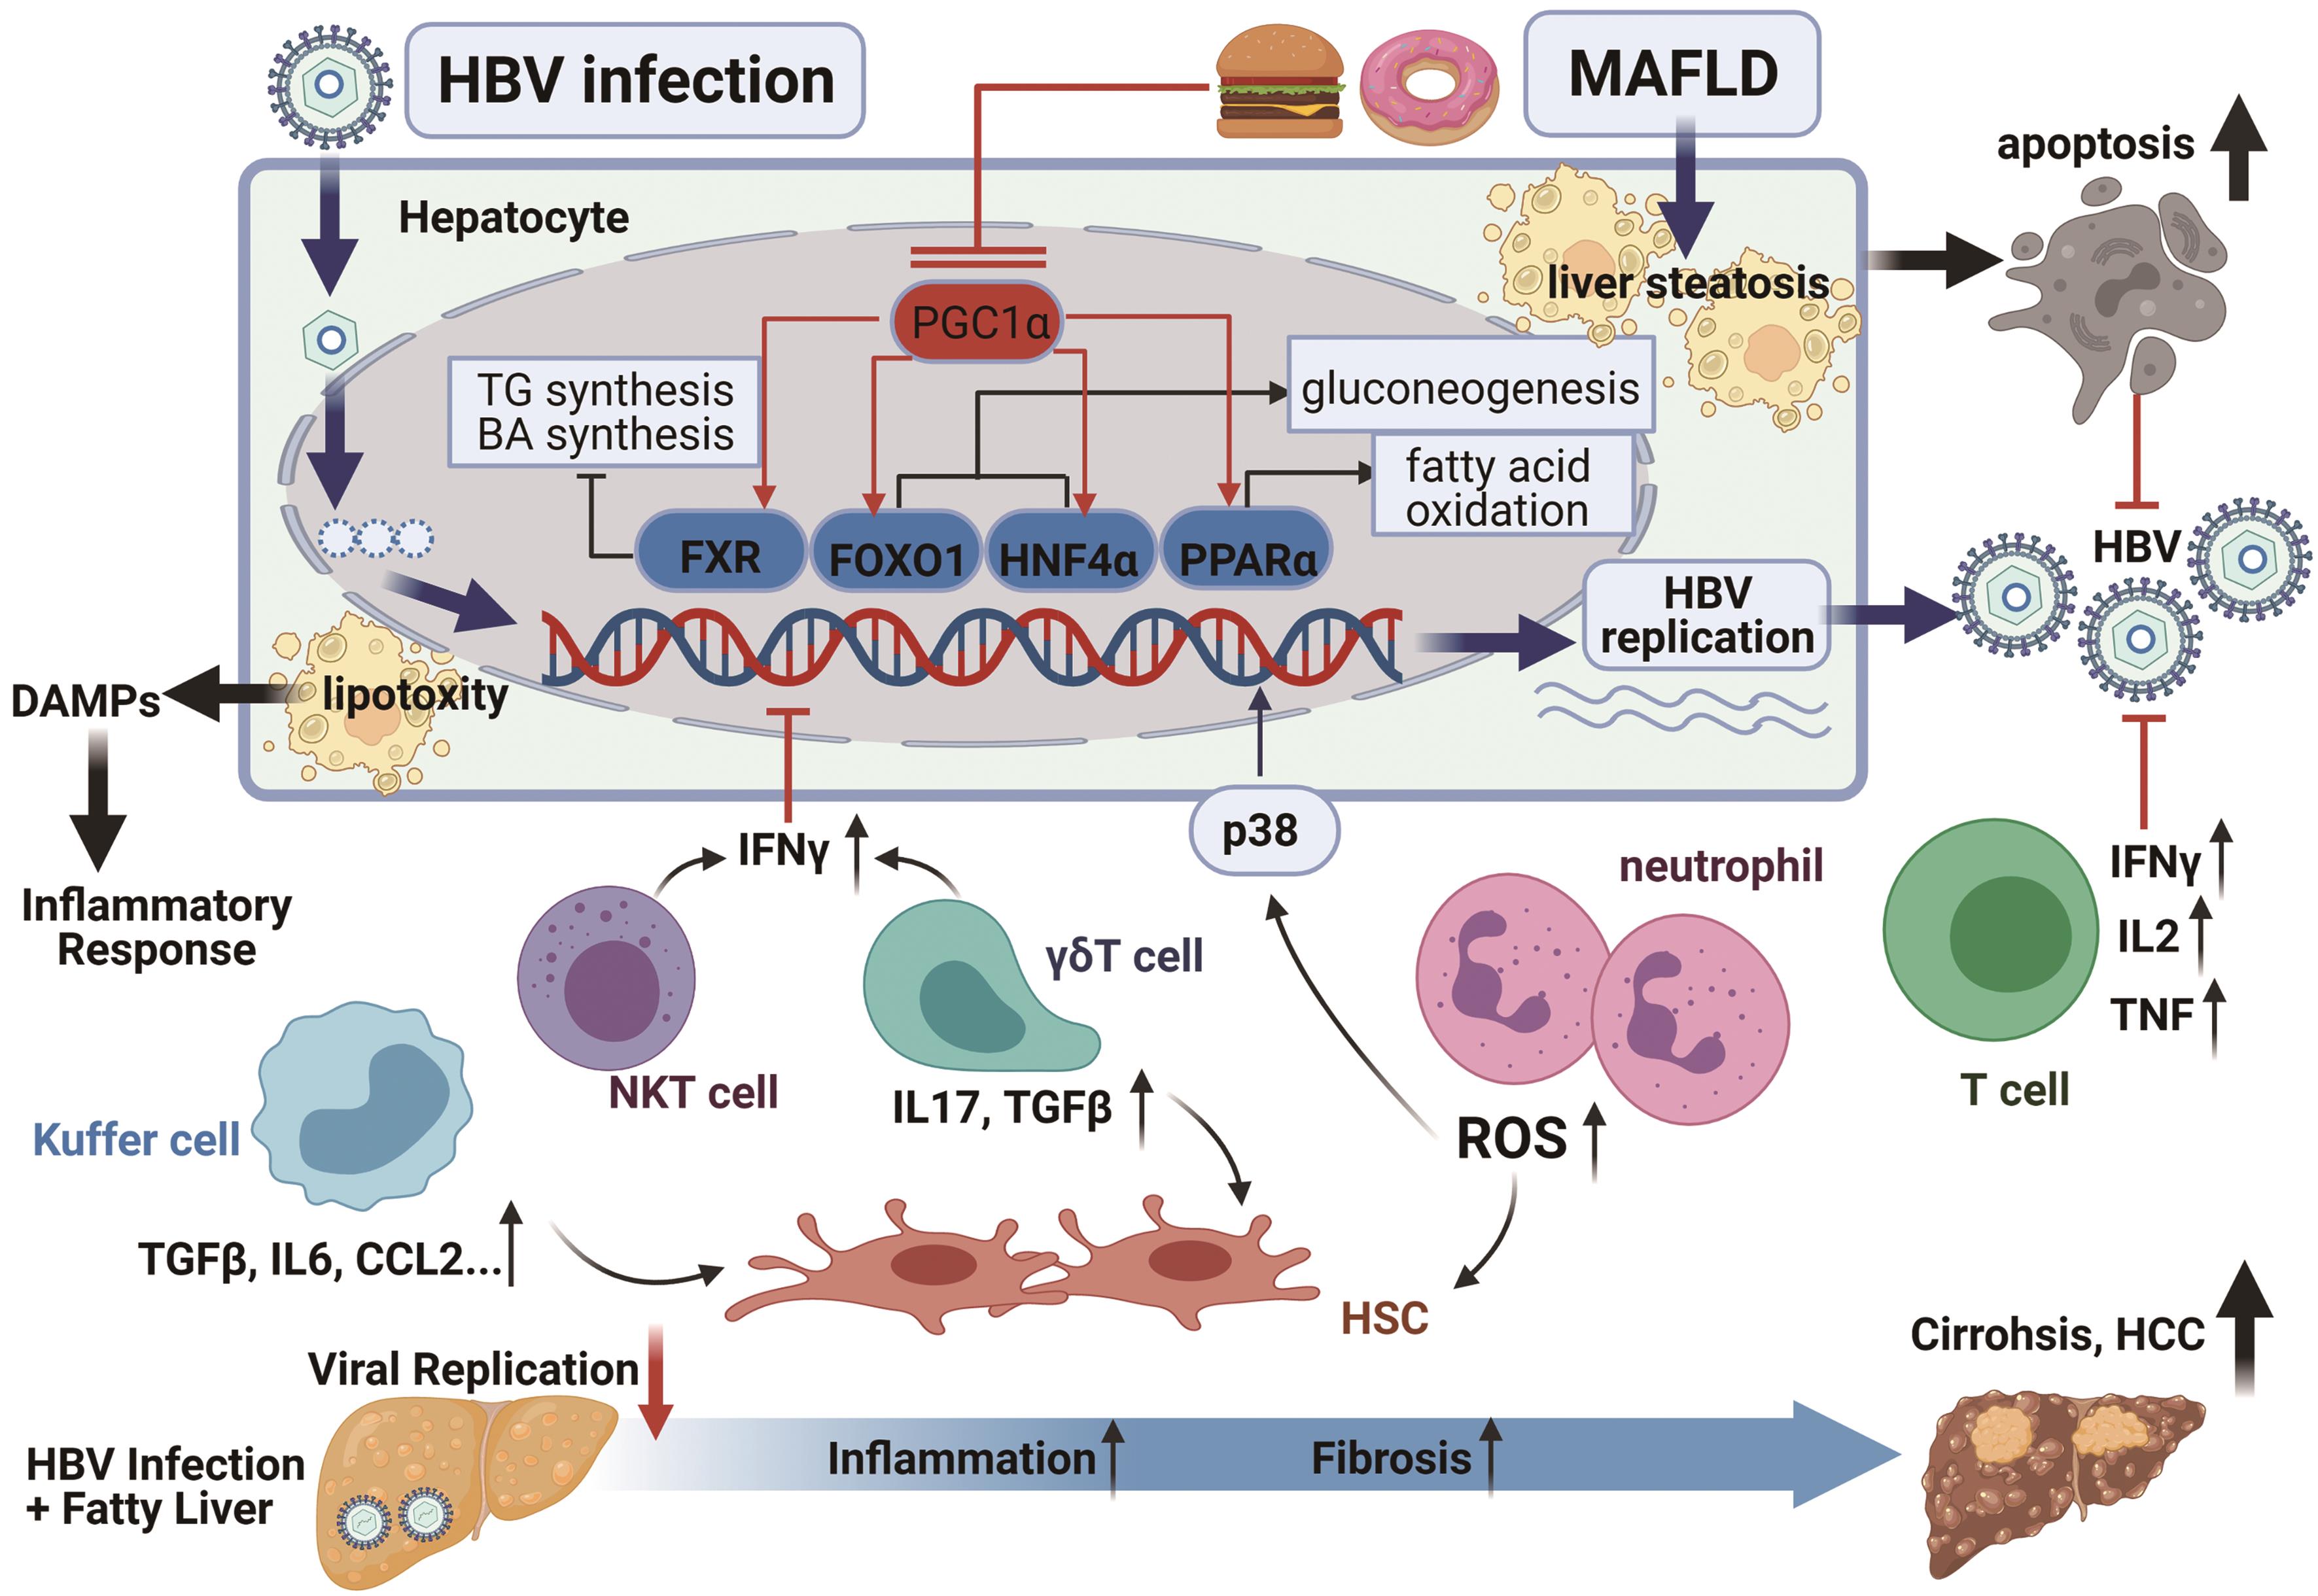 Potential mechanisms underlying the impact of liver steatosis on HBV infection and disease progression.